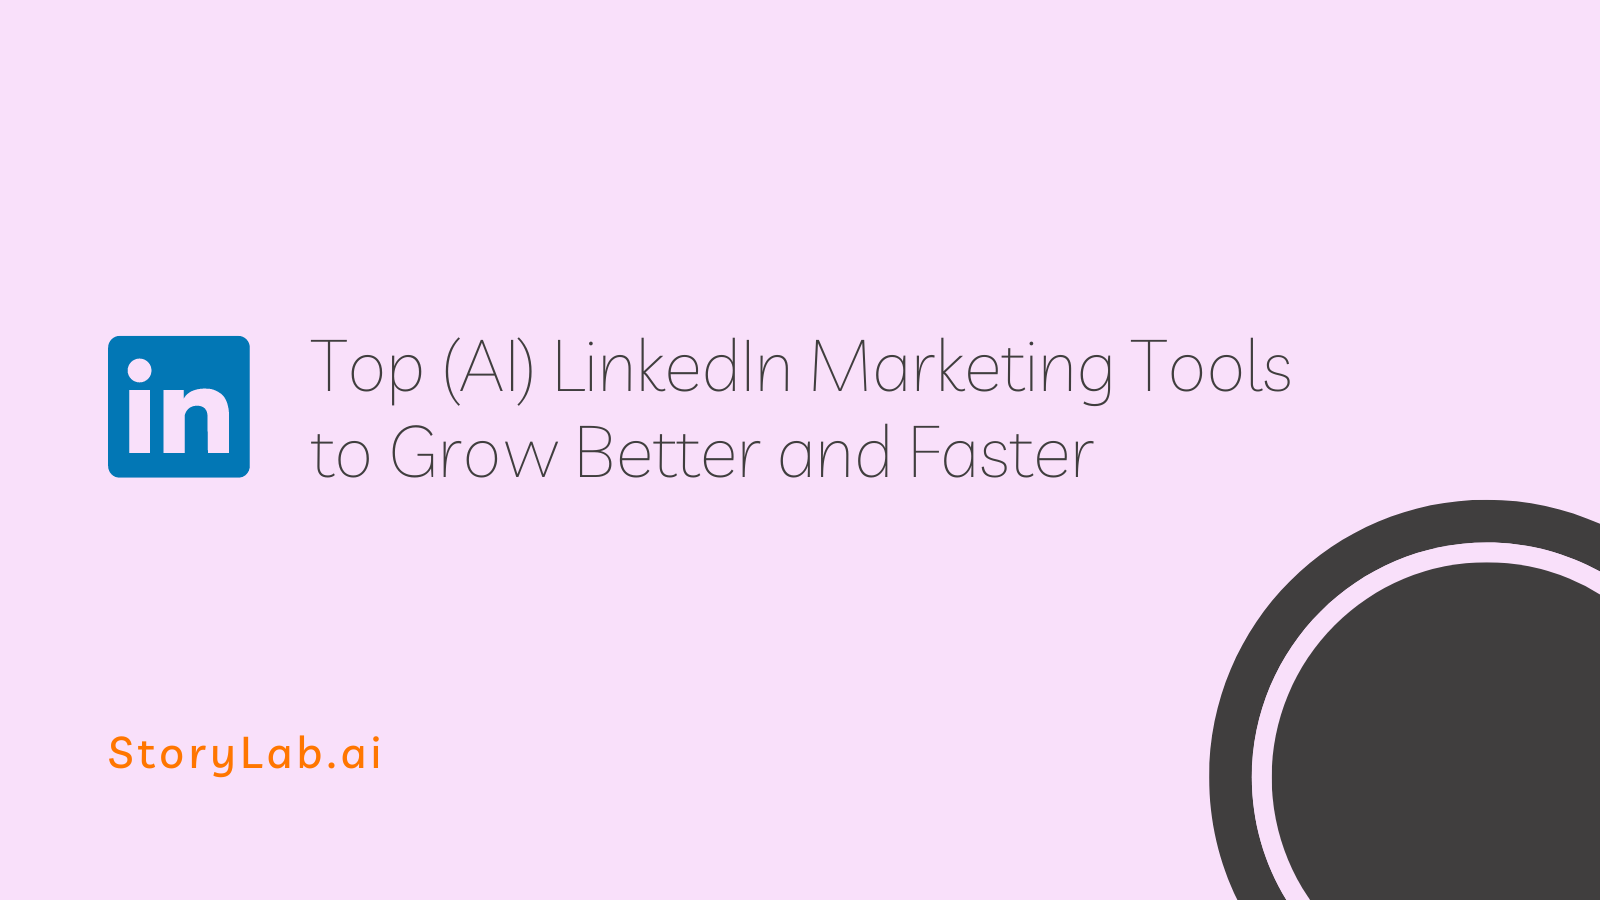 Top AI LinkedIn Marketing Tools to Grow Better and Faster